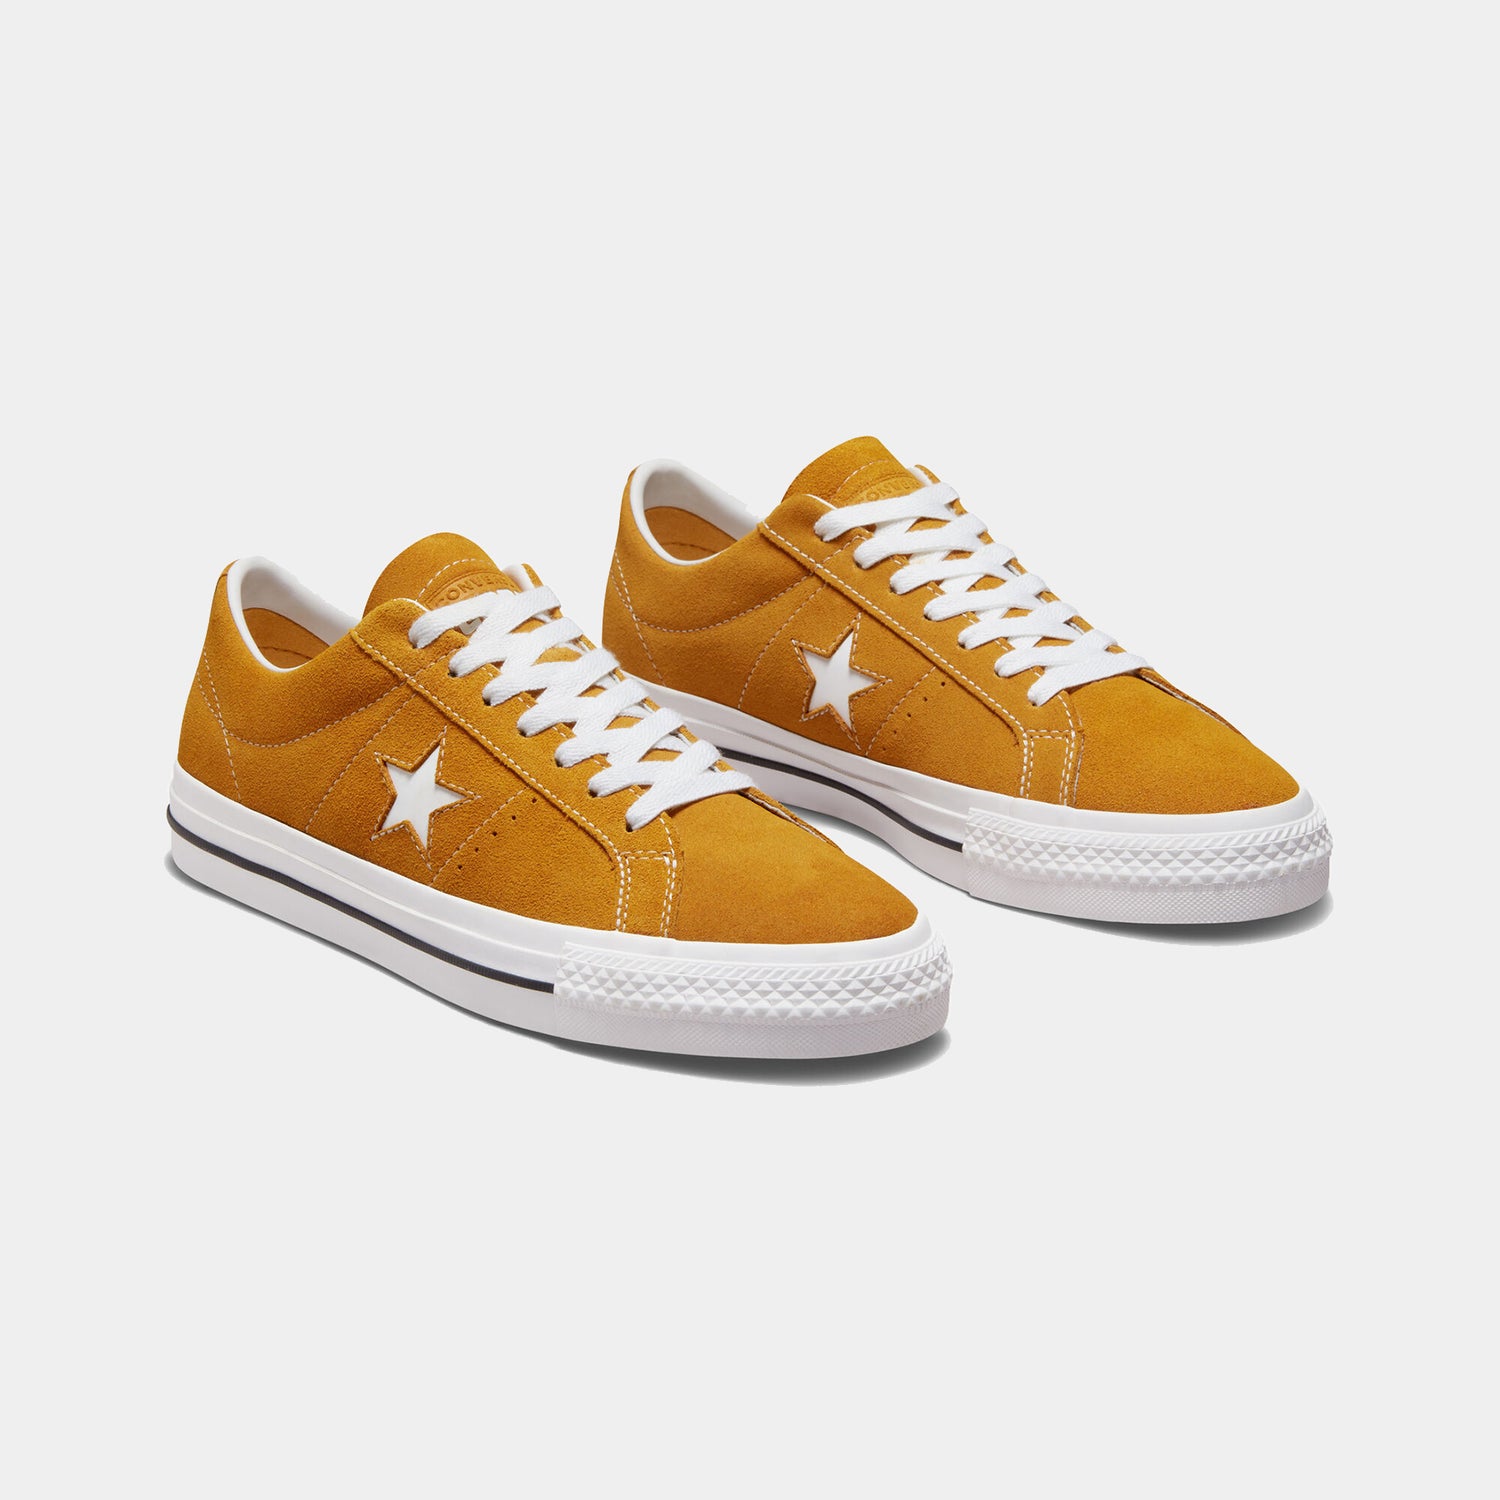 Converse - One Star Pro OX - Brown/Yellow